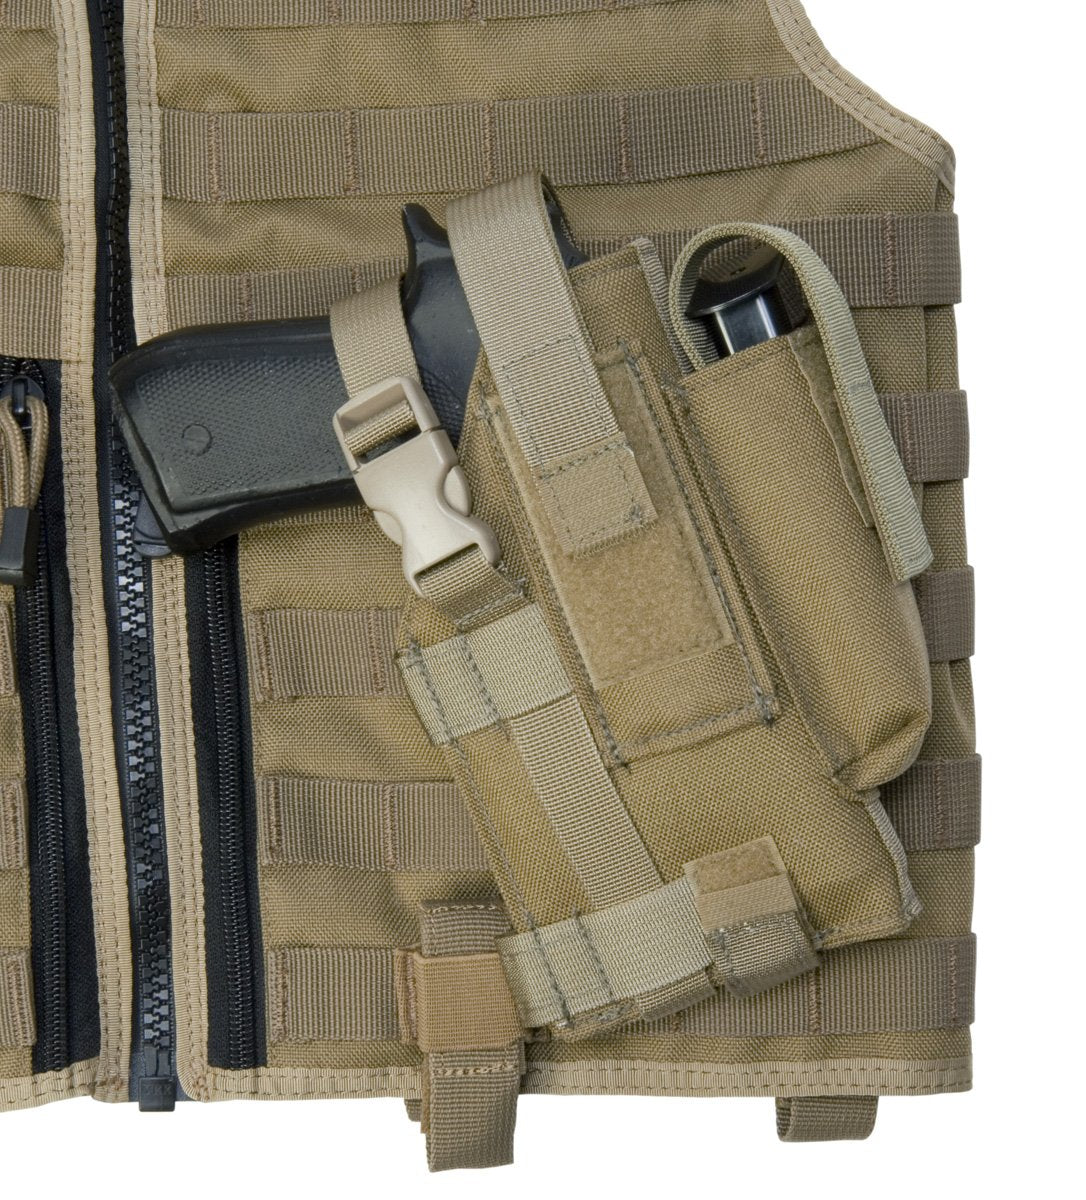 Tactical MOLLE Gun Holster Holder with Magazine Pouch for Beretta  92FS/Taurus G3